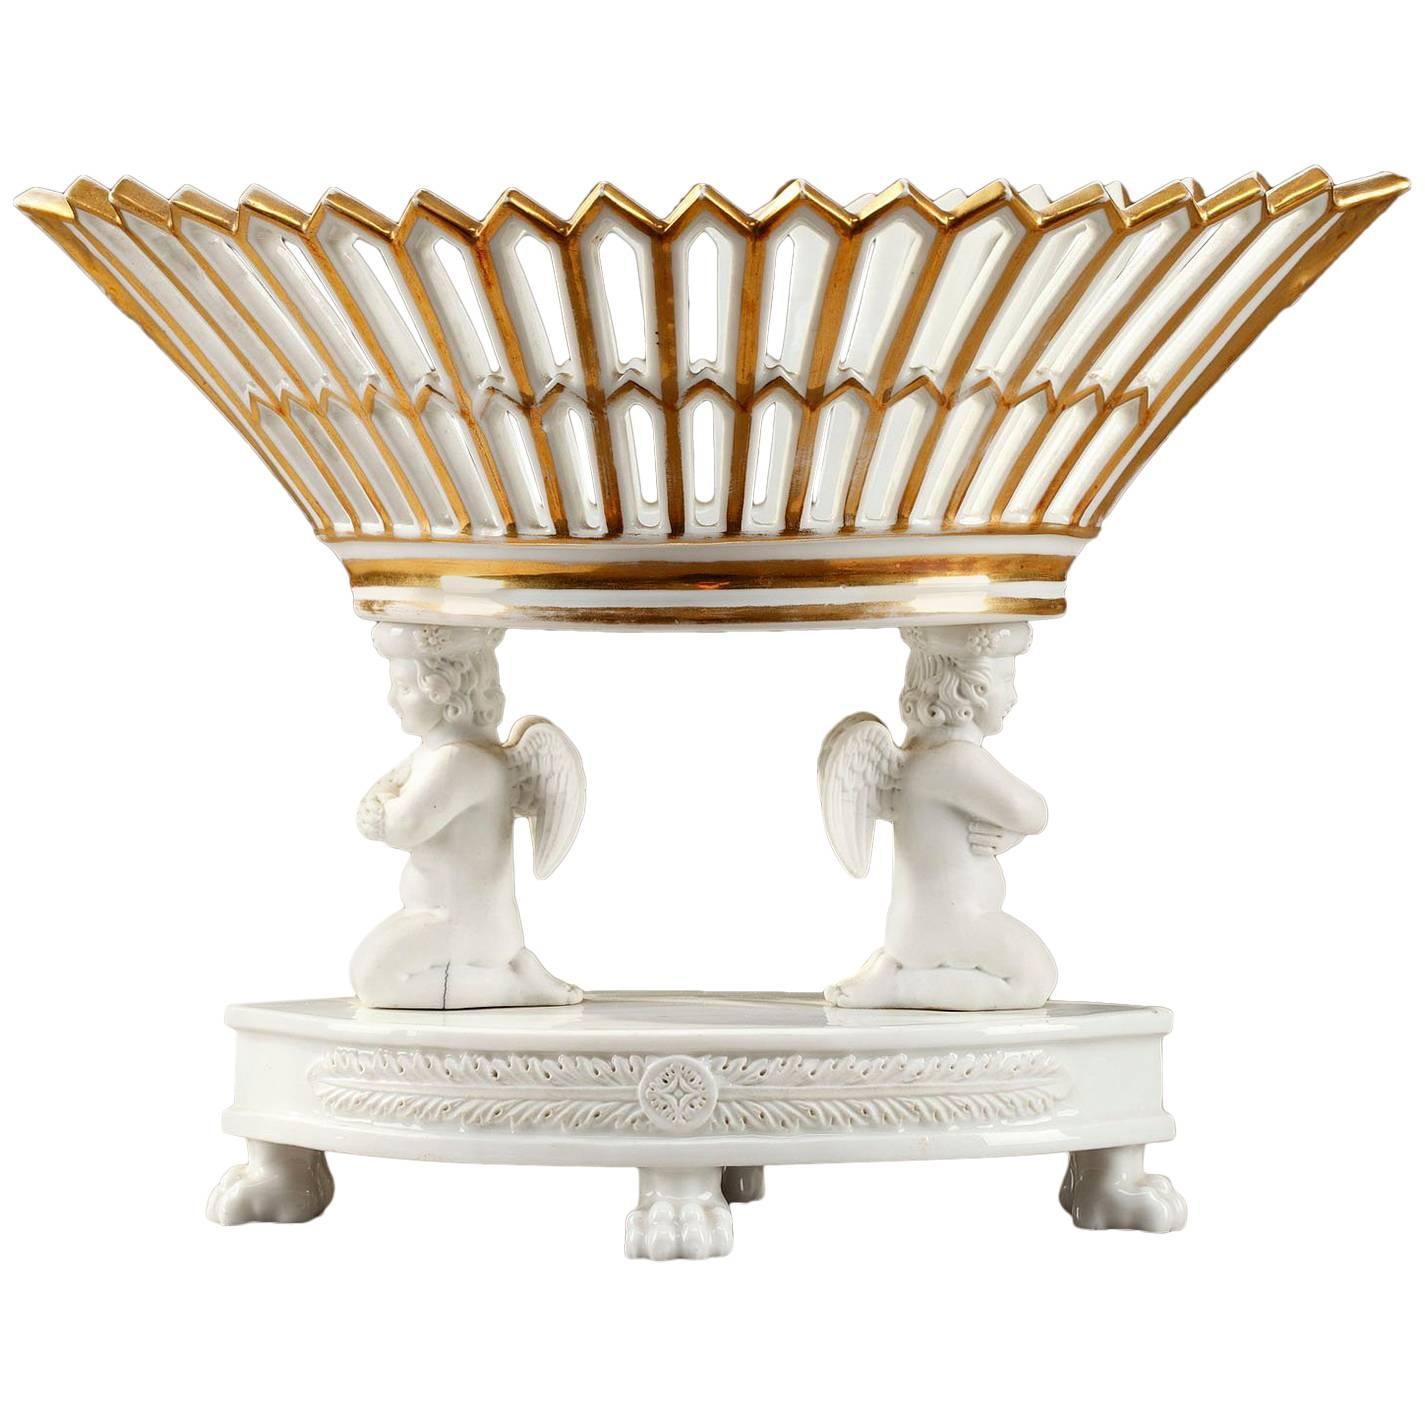 Early 19th Century Empire Bisque and Porcelain Table Centerpiece